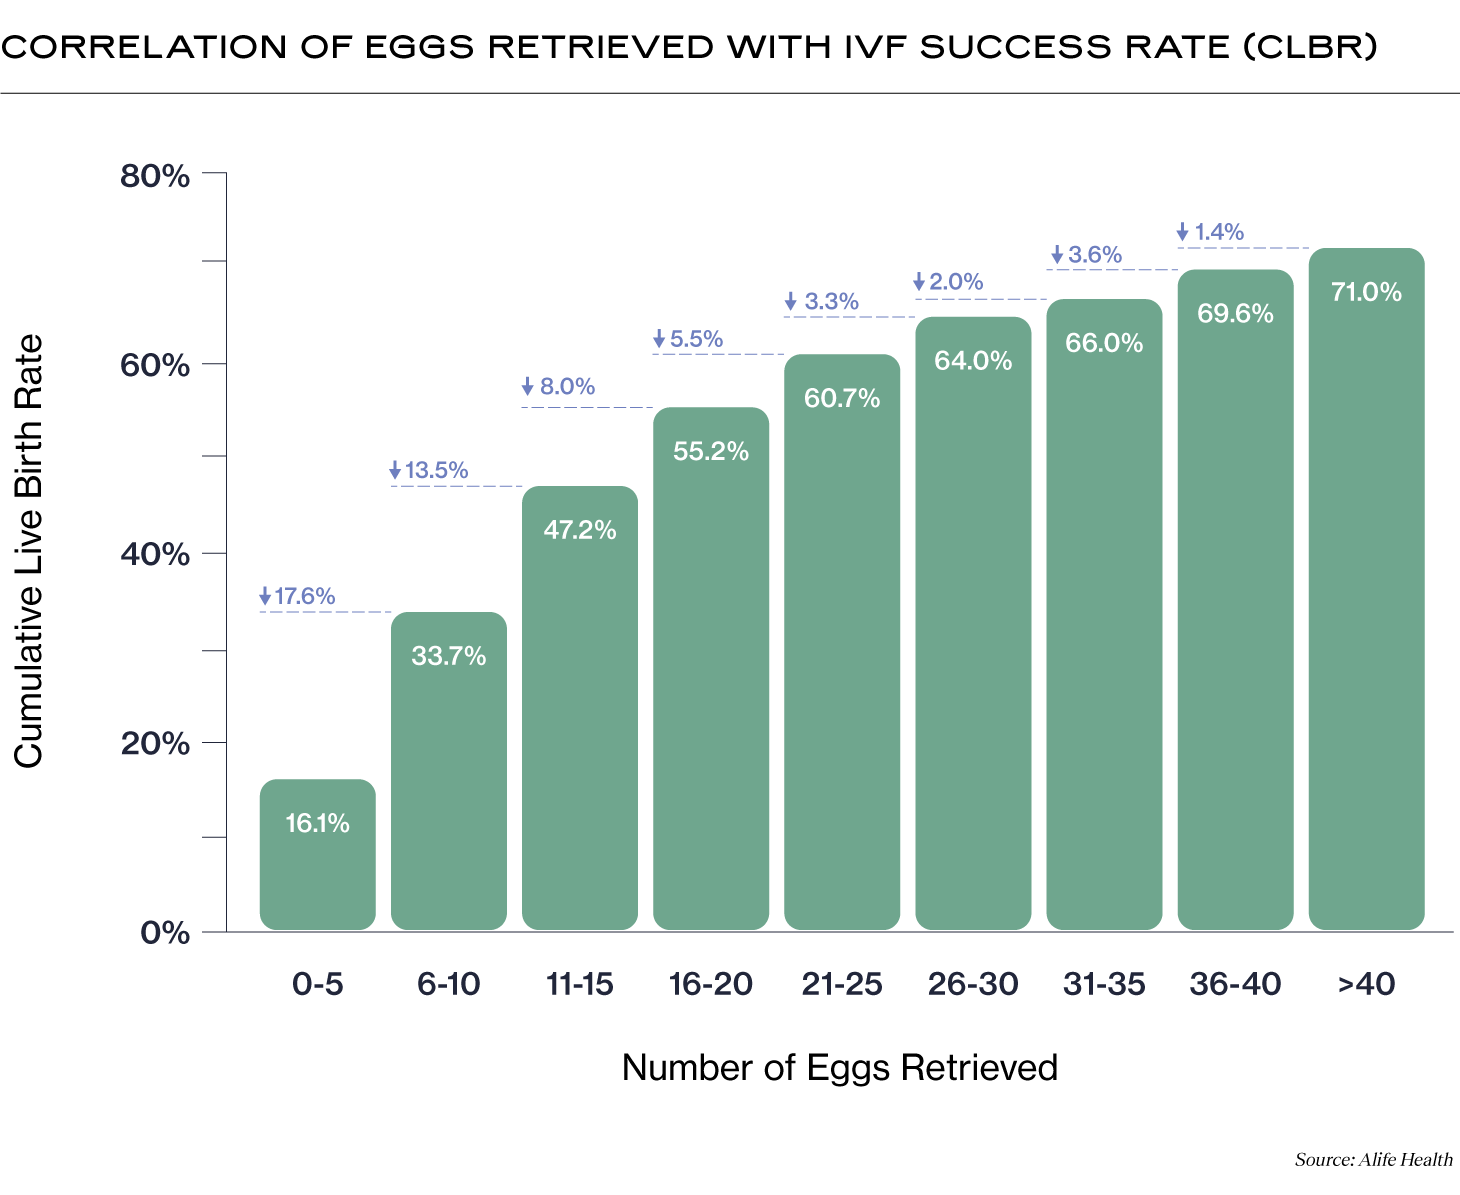 Correlation of Eggs Retrieved with IVF Success Rate